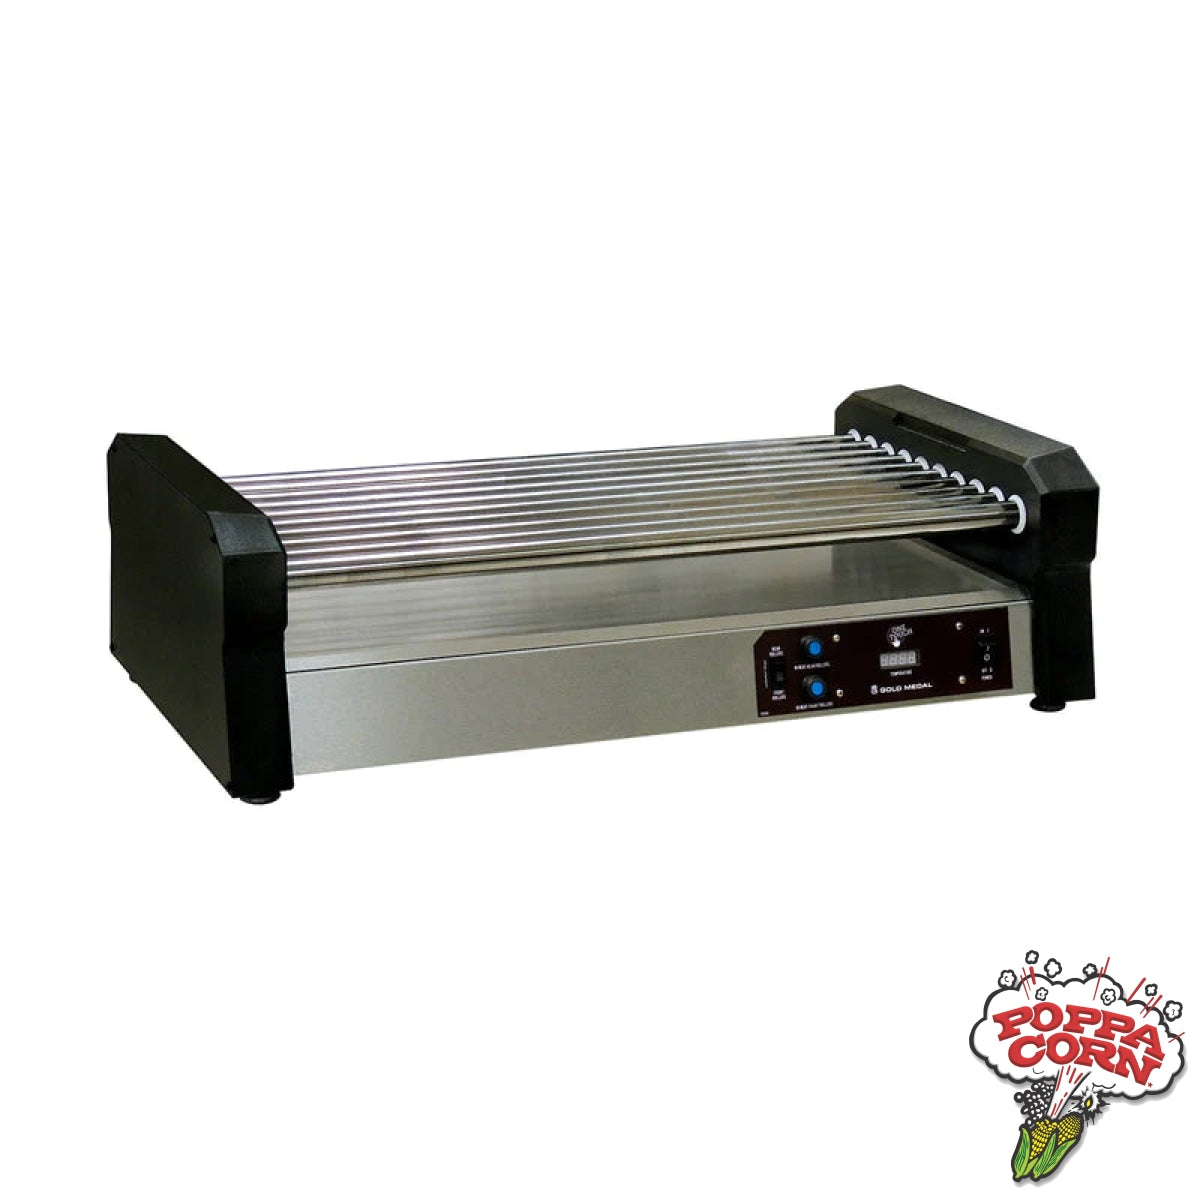 One Touch Hot Diggity Pro X Roller Grill - Stainless Steel Rollers - GM8552-00-010 - Poppa Corn Corp